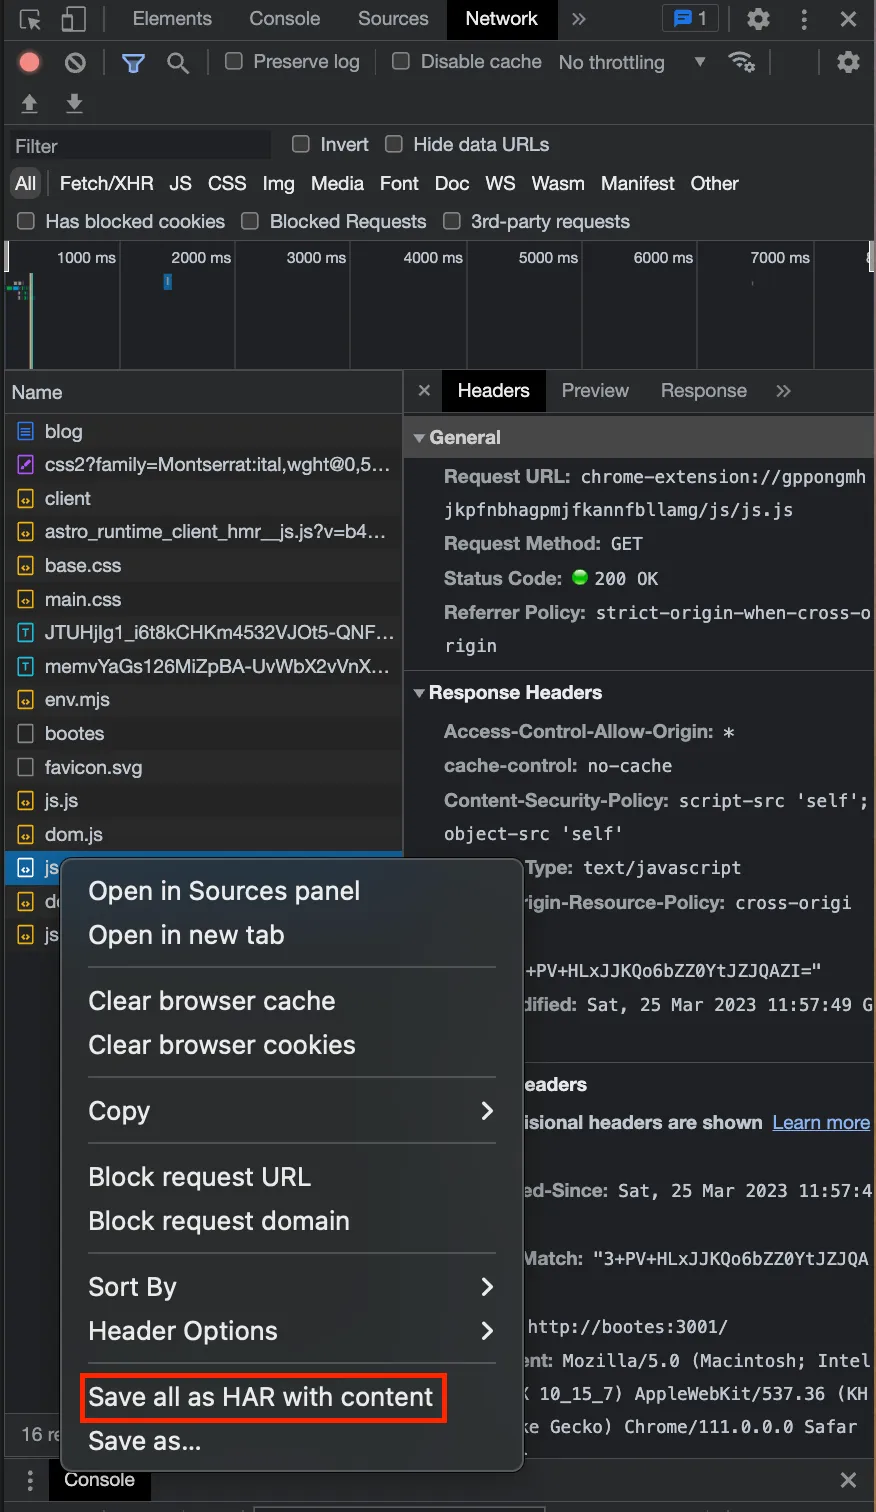 Chrome Devtools > Network > right click request > context menu with "Save all as HAR with content" highlighted